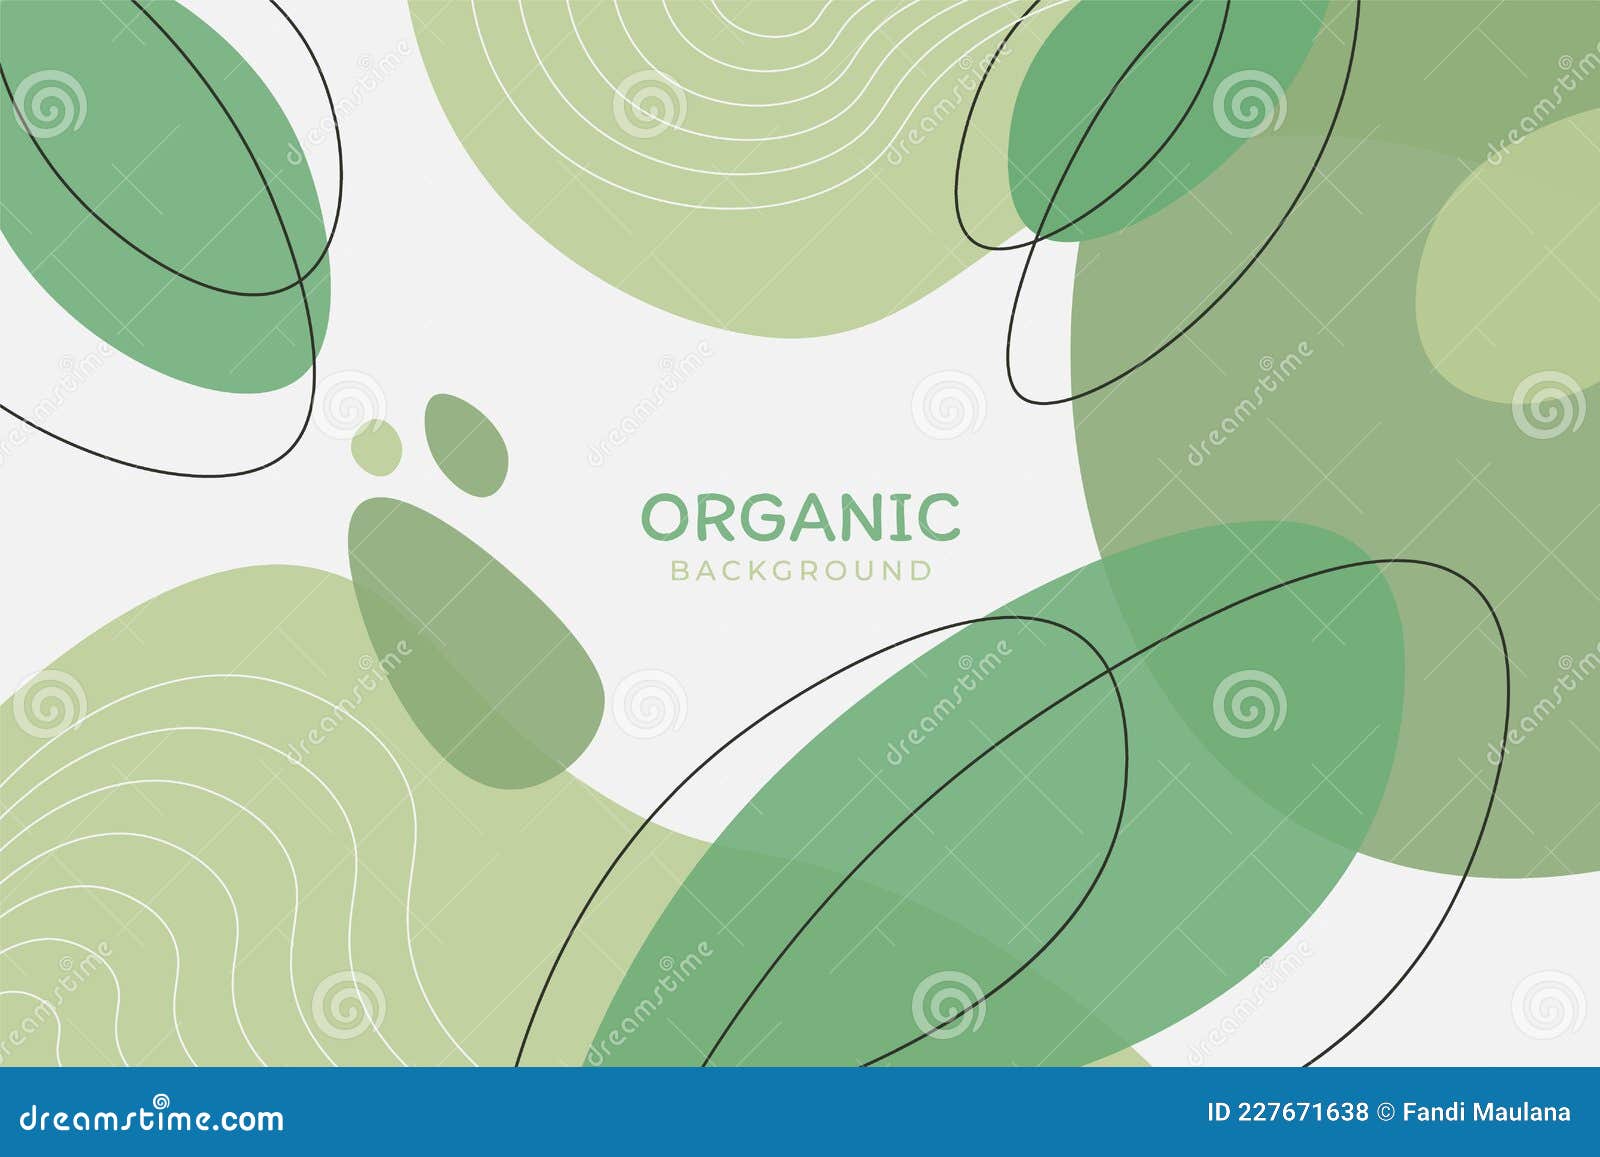 Abstract Organic Shape Hand Drawn Aesthetic Green Minimal Background Stock  Vector - Illustration of aesthetic, background: 227671638